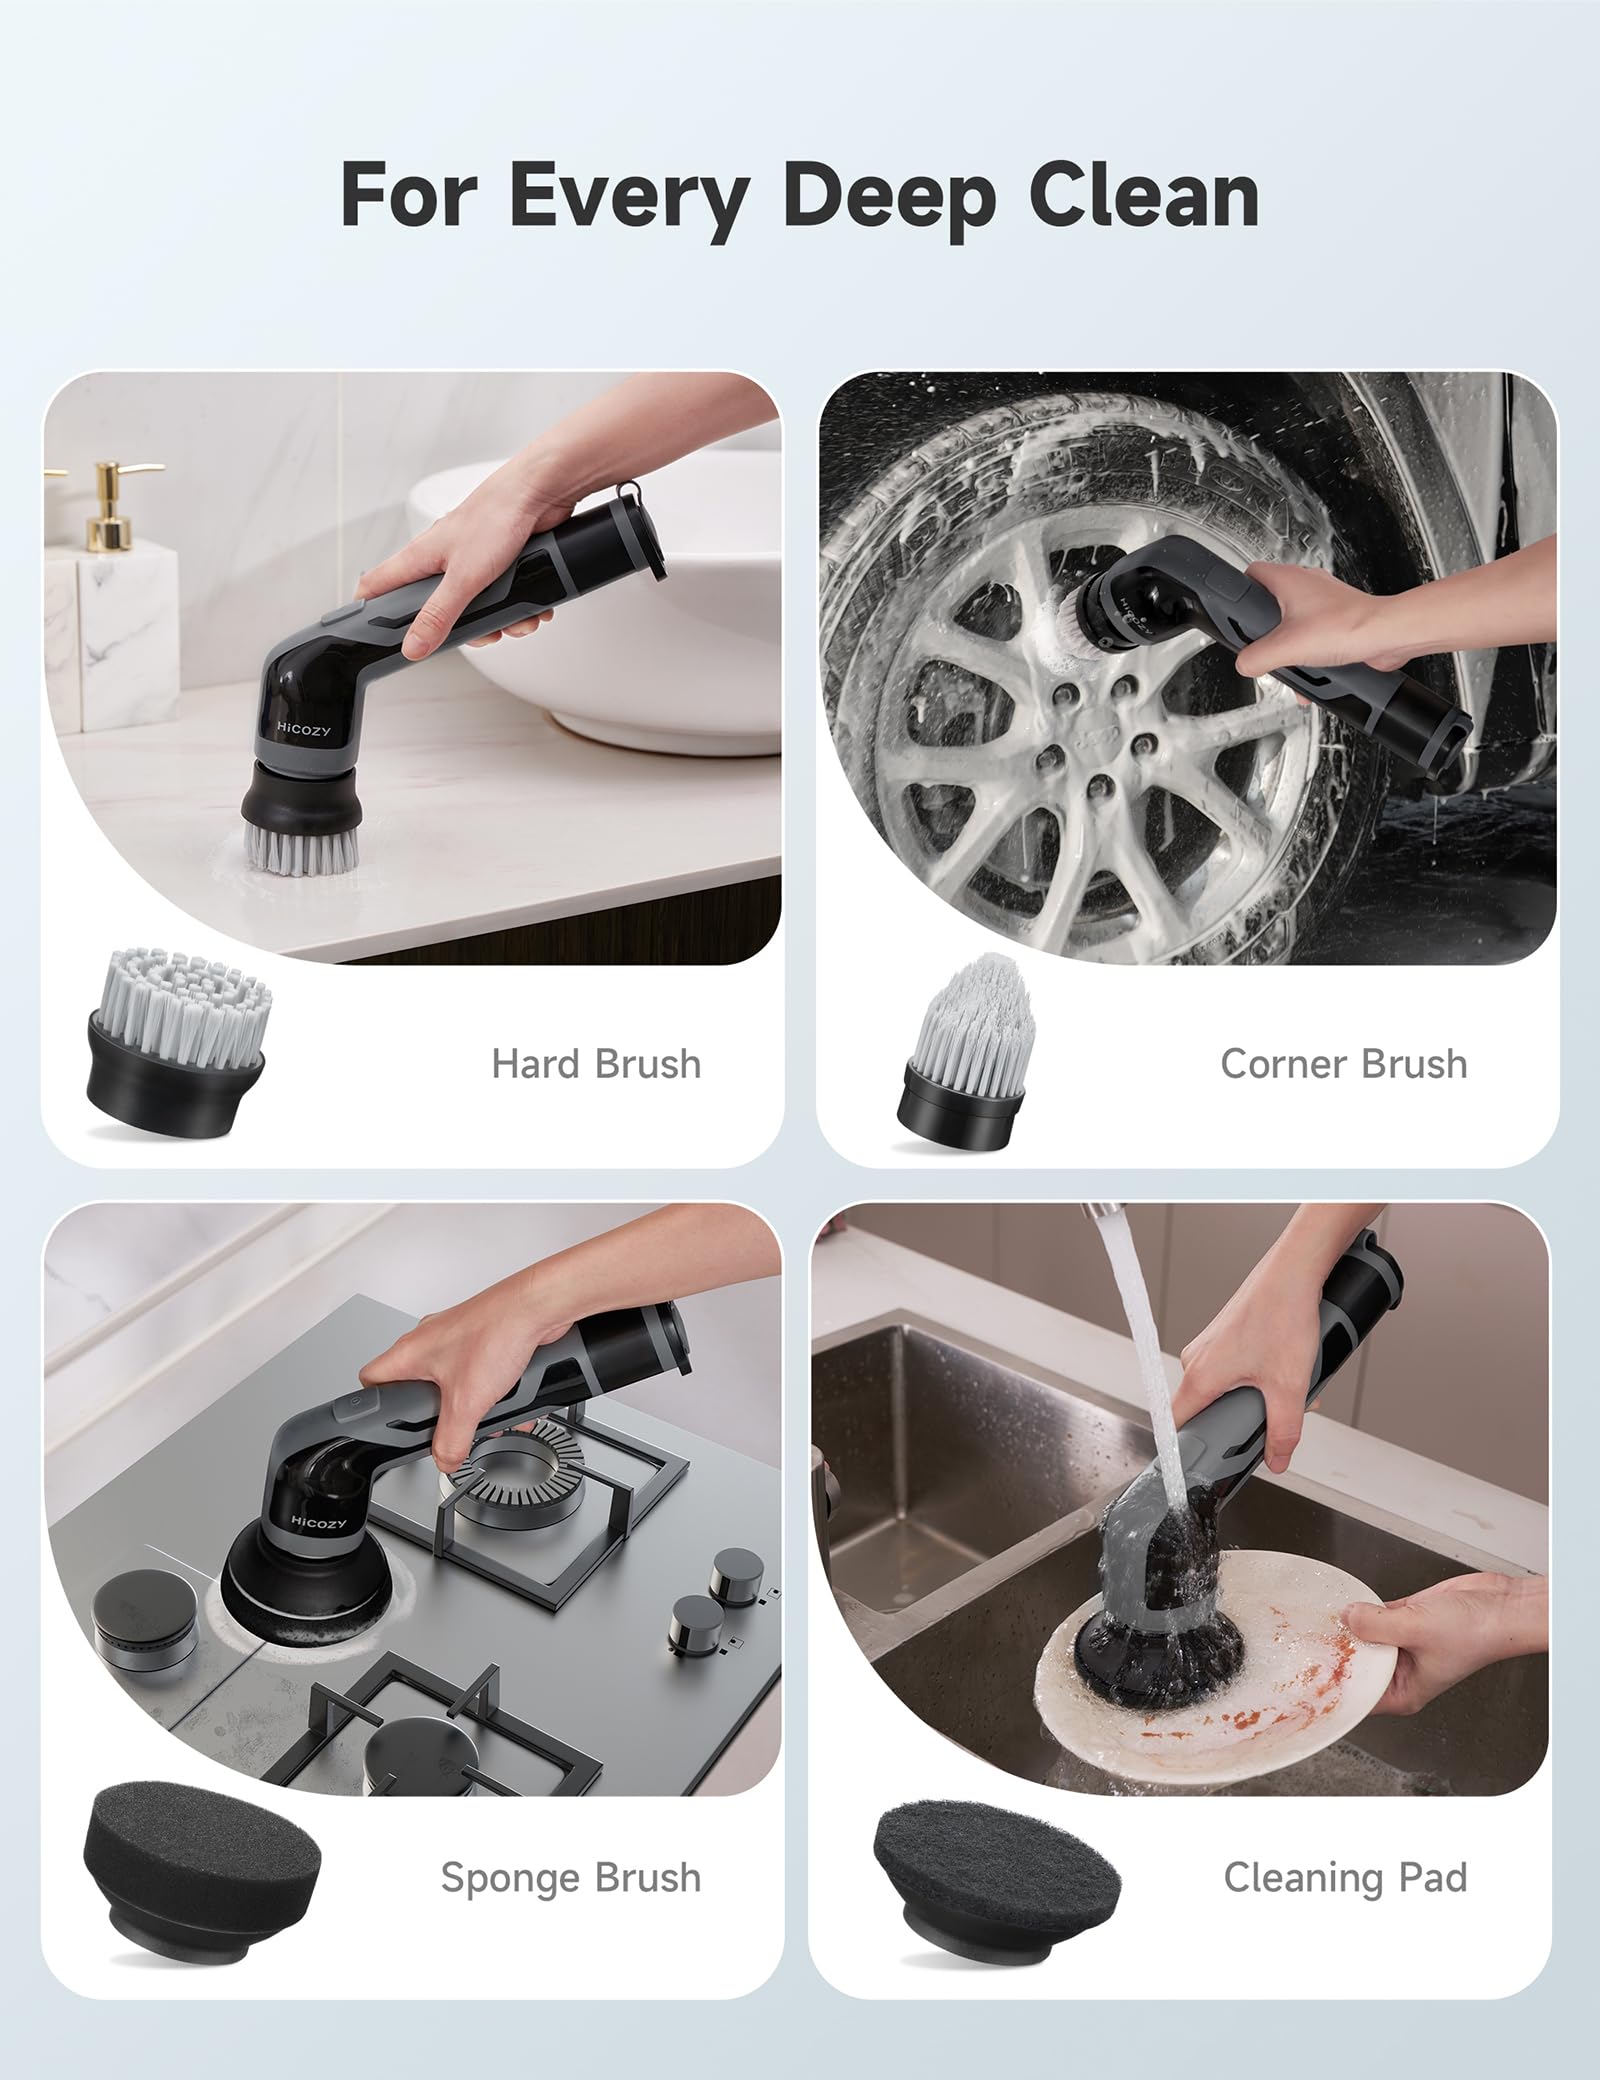 HiCOZY Electric Spin Scrubber HSE1, Power Cordless Scrubber for Cleaning Kitchen Bathroom Car Tile Grill with 2 Adjustable Speeds, 4 Replaceable Brush Heads Black